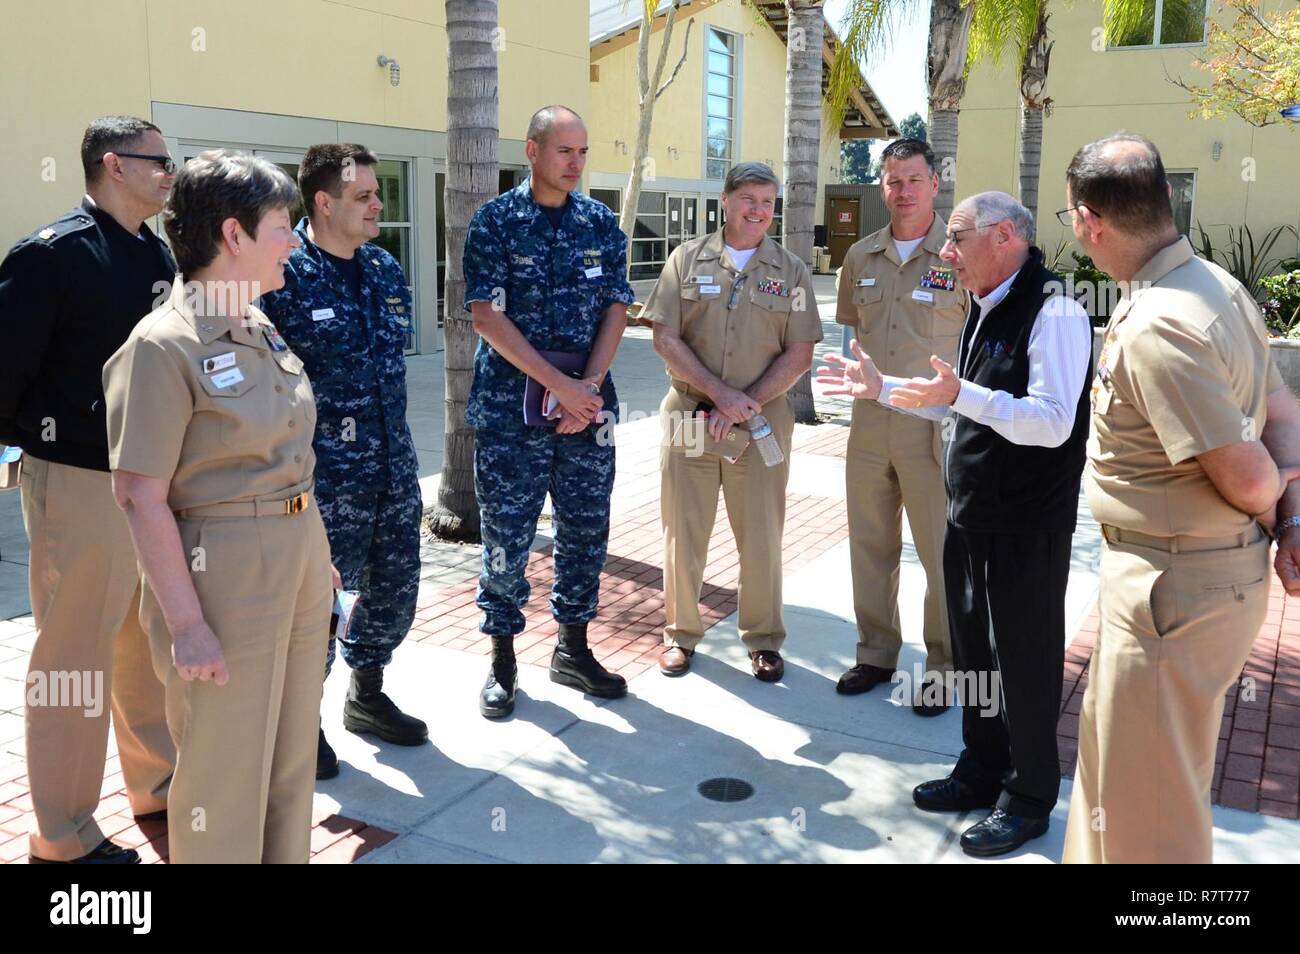 SAN DIEGO (April 5, 2017) Veterans Village of San Diego (VVSD) President Phil Landis (2nd from the left) talks about the history of the site and each building to members of the Executive Steering Council from Naval Medical Center San Diego (NMCSD) during a tour of VVSD facilities. VVSD is dedicated to serving homeless military veterans and is dedicated to “Leave No One Behind.” Stock Photo